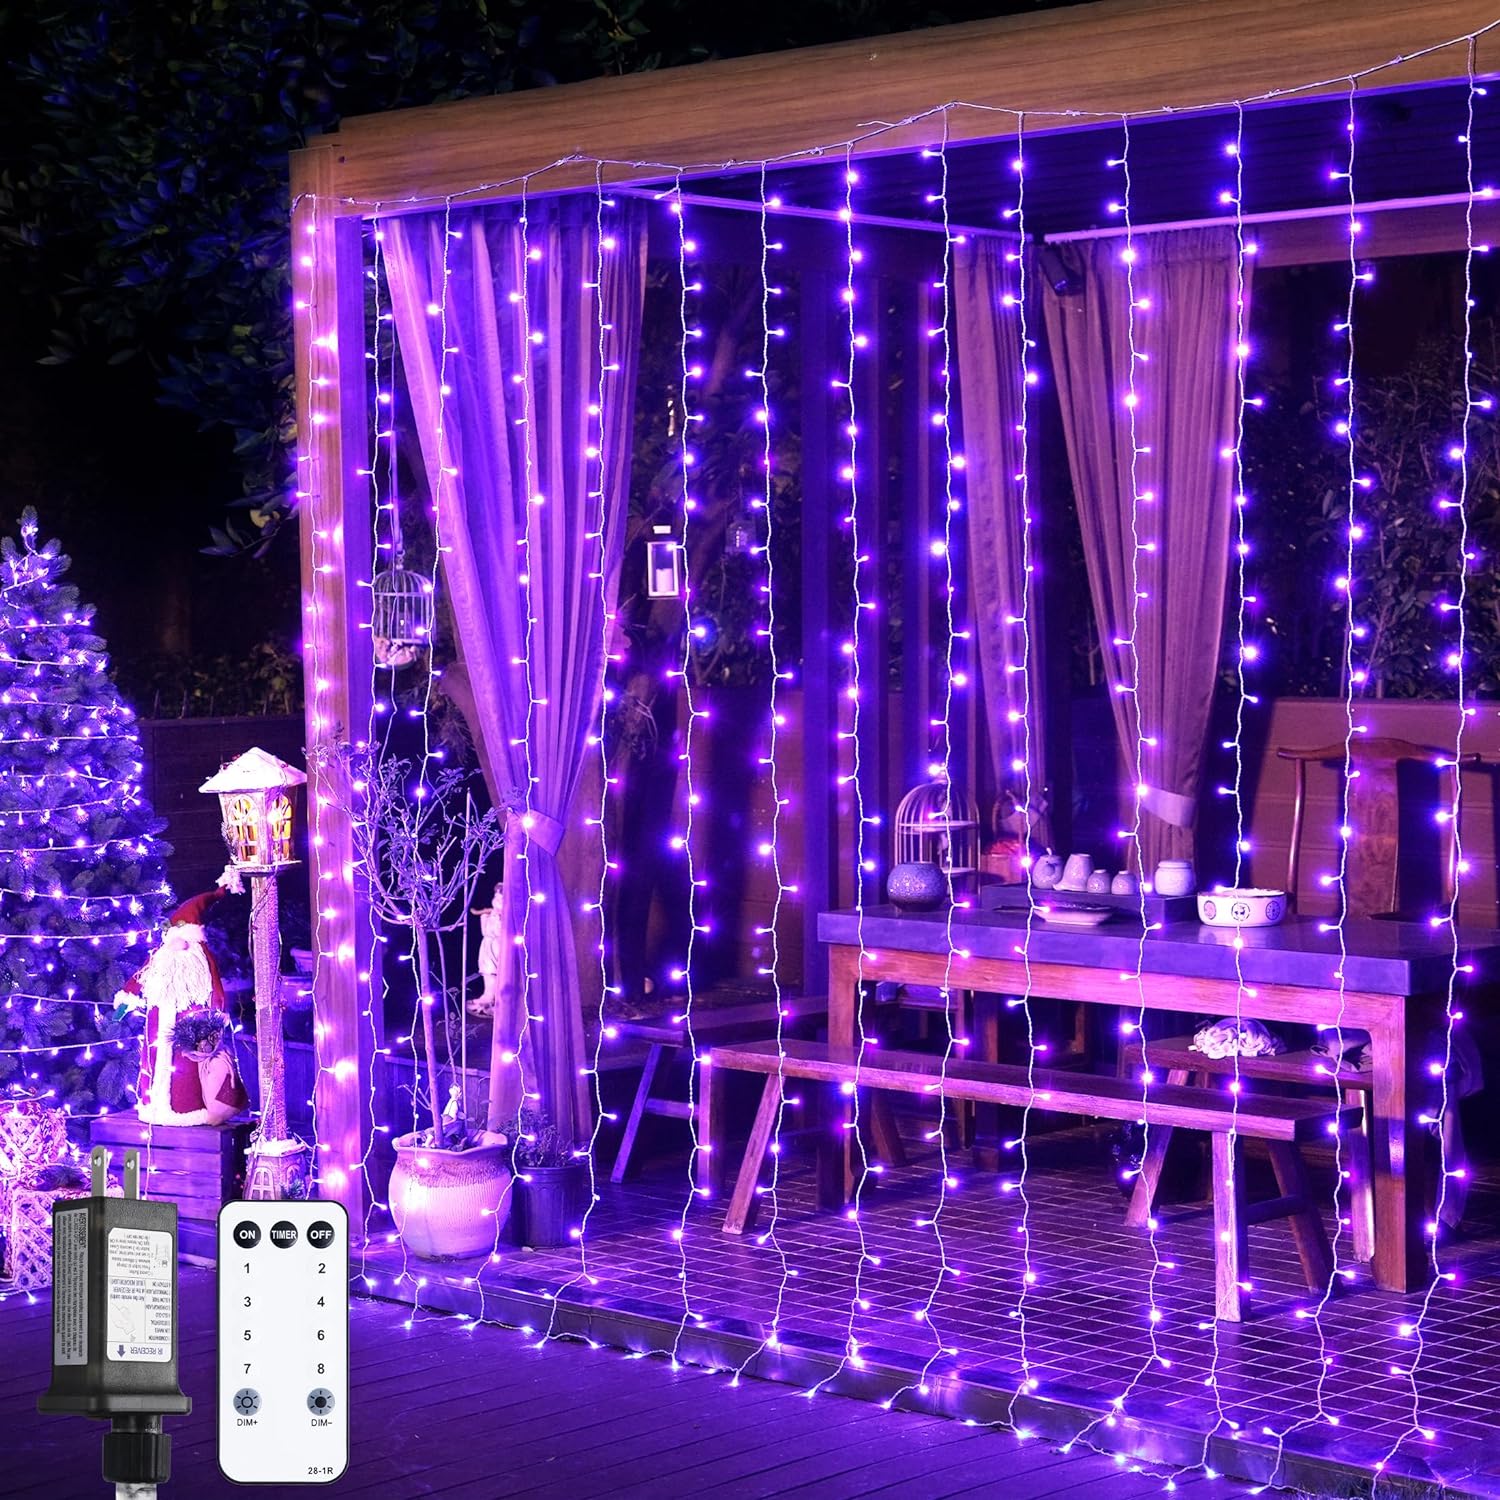 JMEXSUSS 300LED Purple Curtain Lights with Remote, Christmas Curtain Hanging Lights Plug in, 8 Modes Purple String Lights for Bedroom Window Wall Party Backdrop Halloween Christmas Decorations